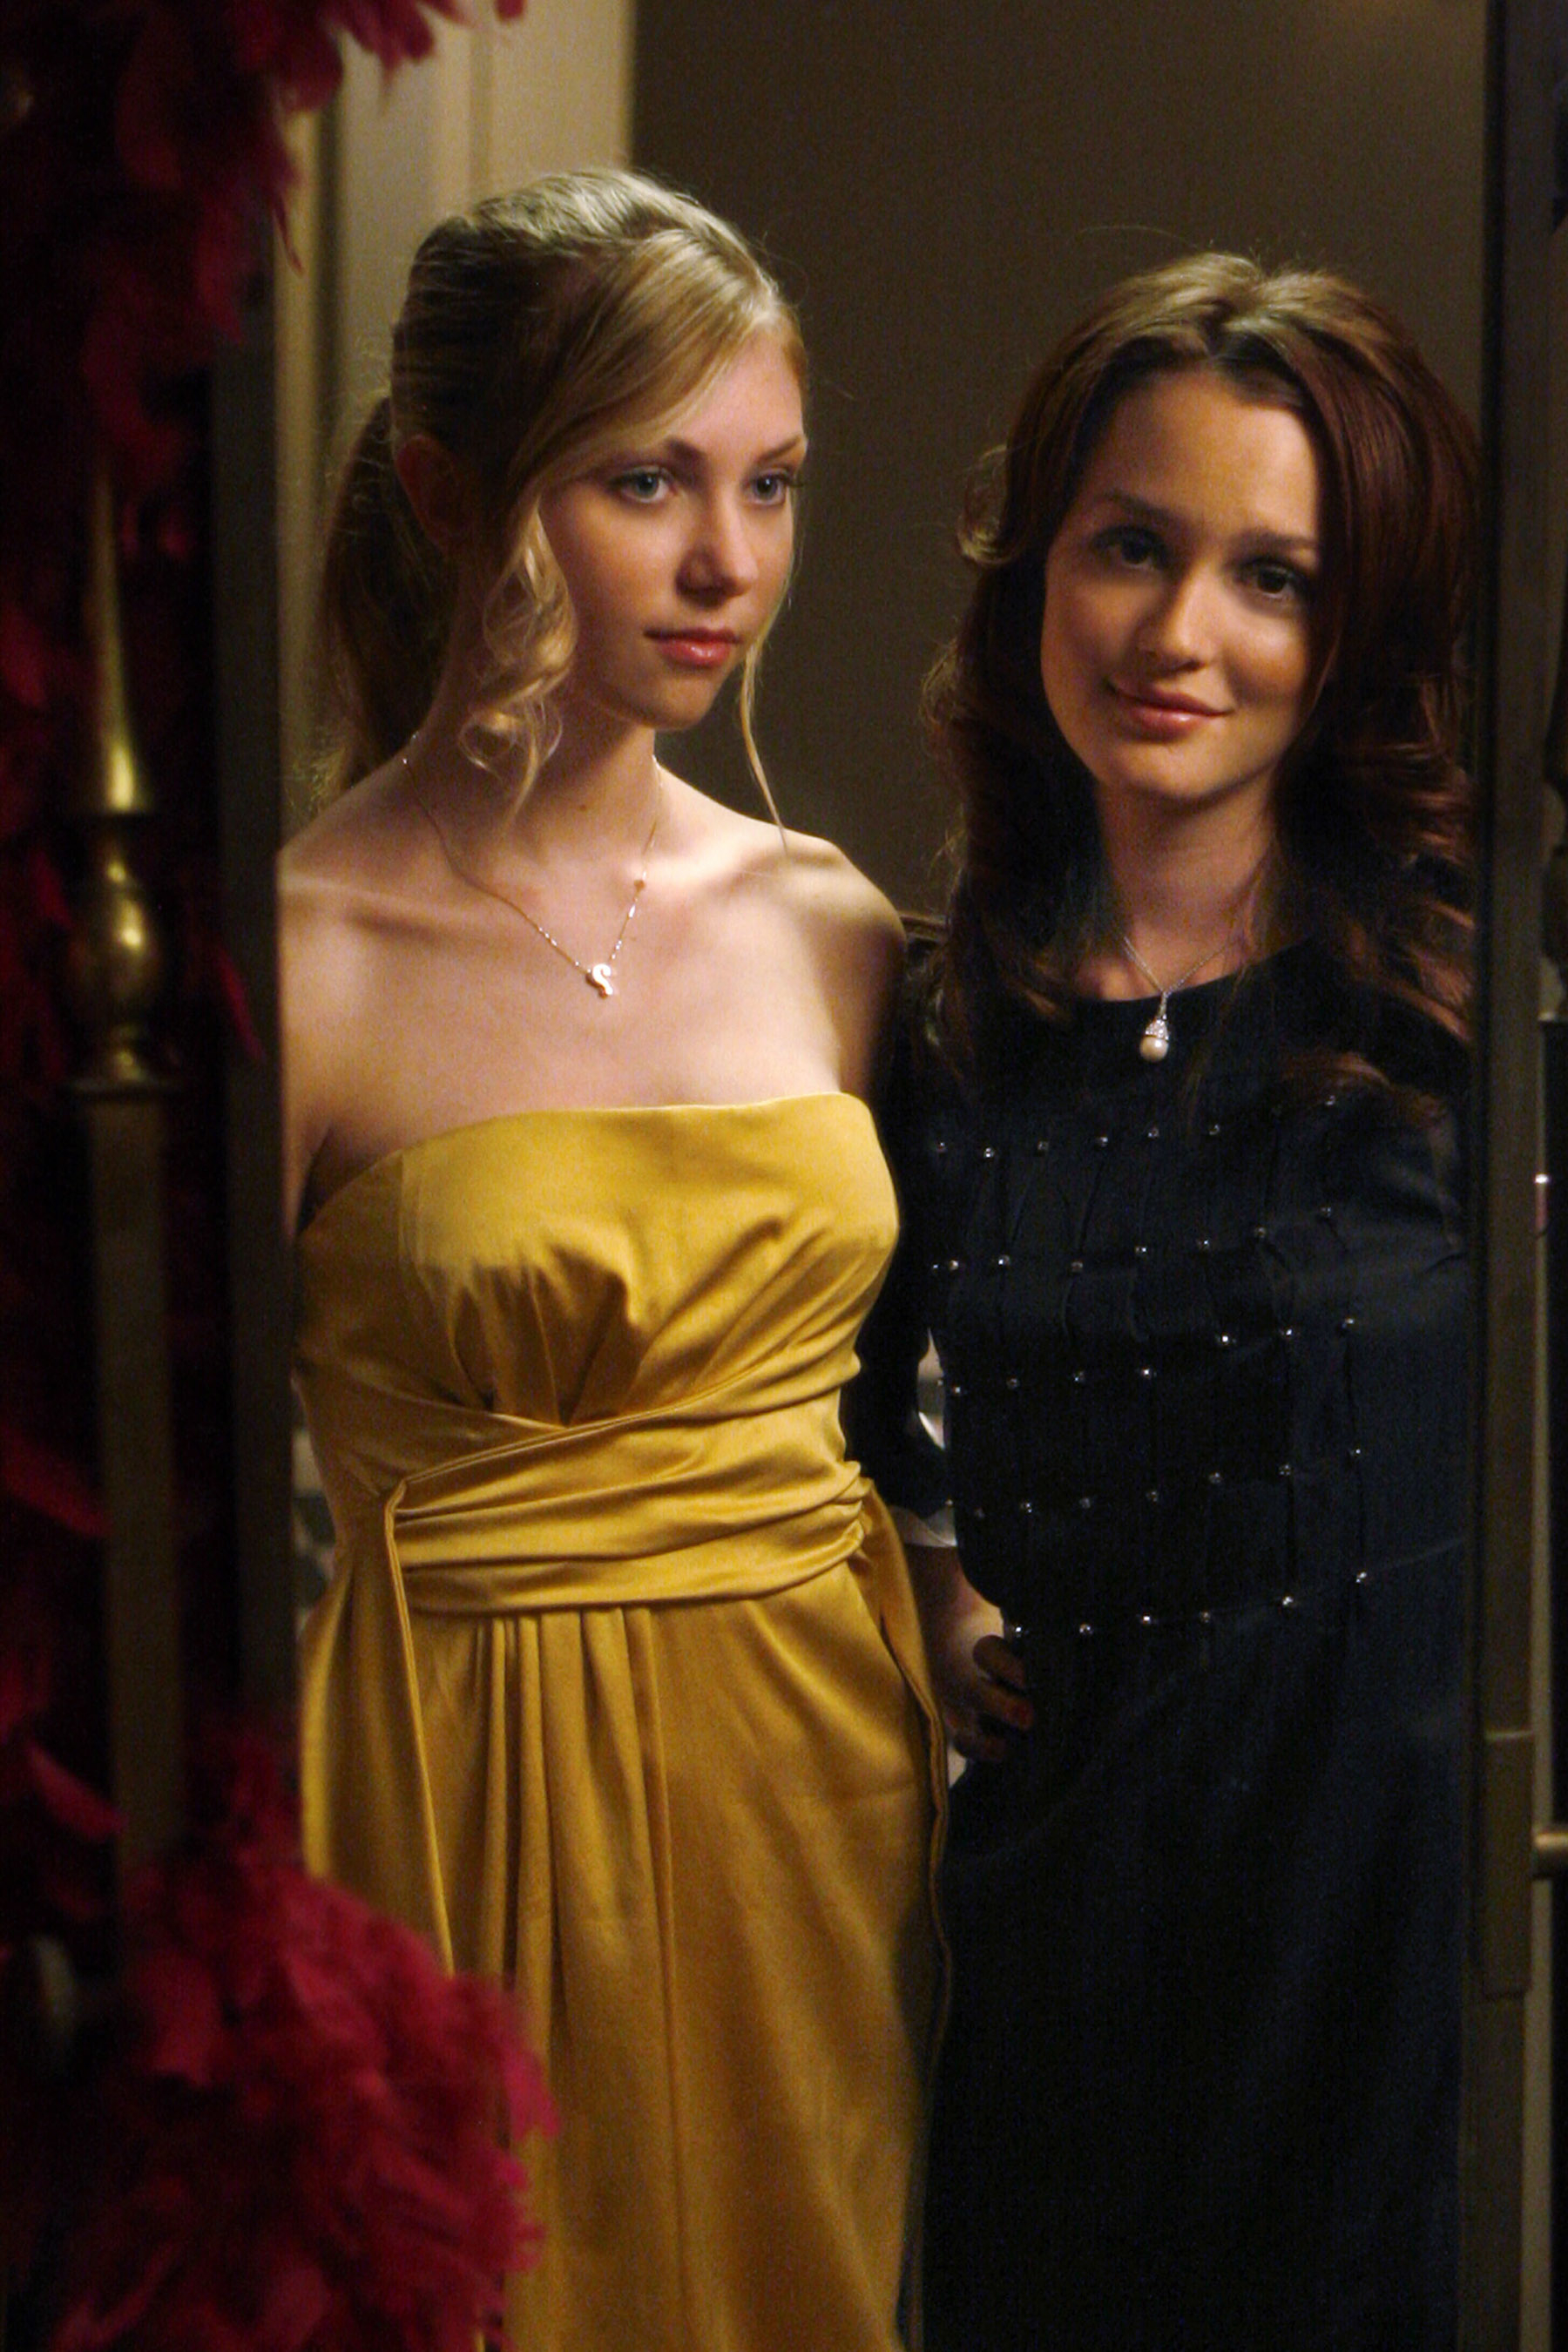 Jenny standing next to another girl and looking in a mirror in a scene from &quot;Gossip Girl&quot;